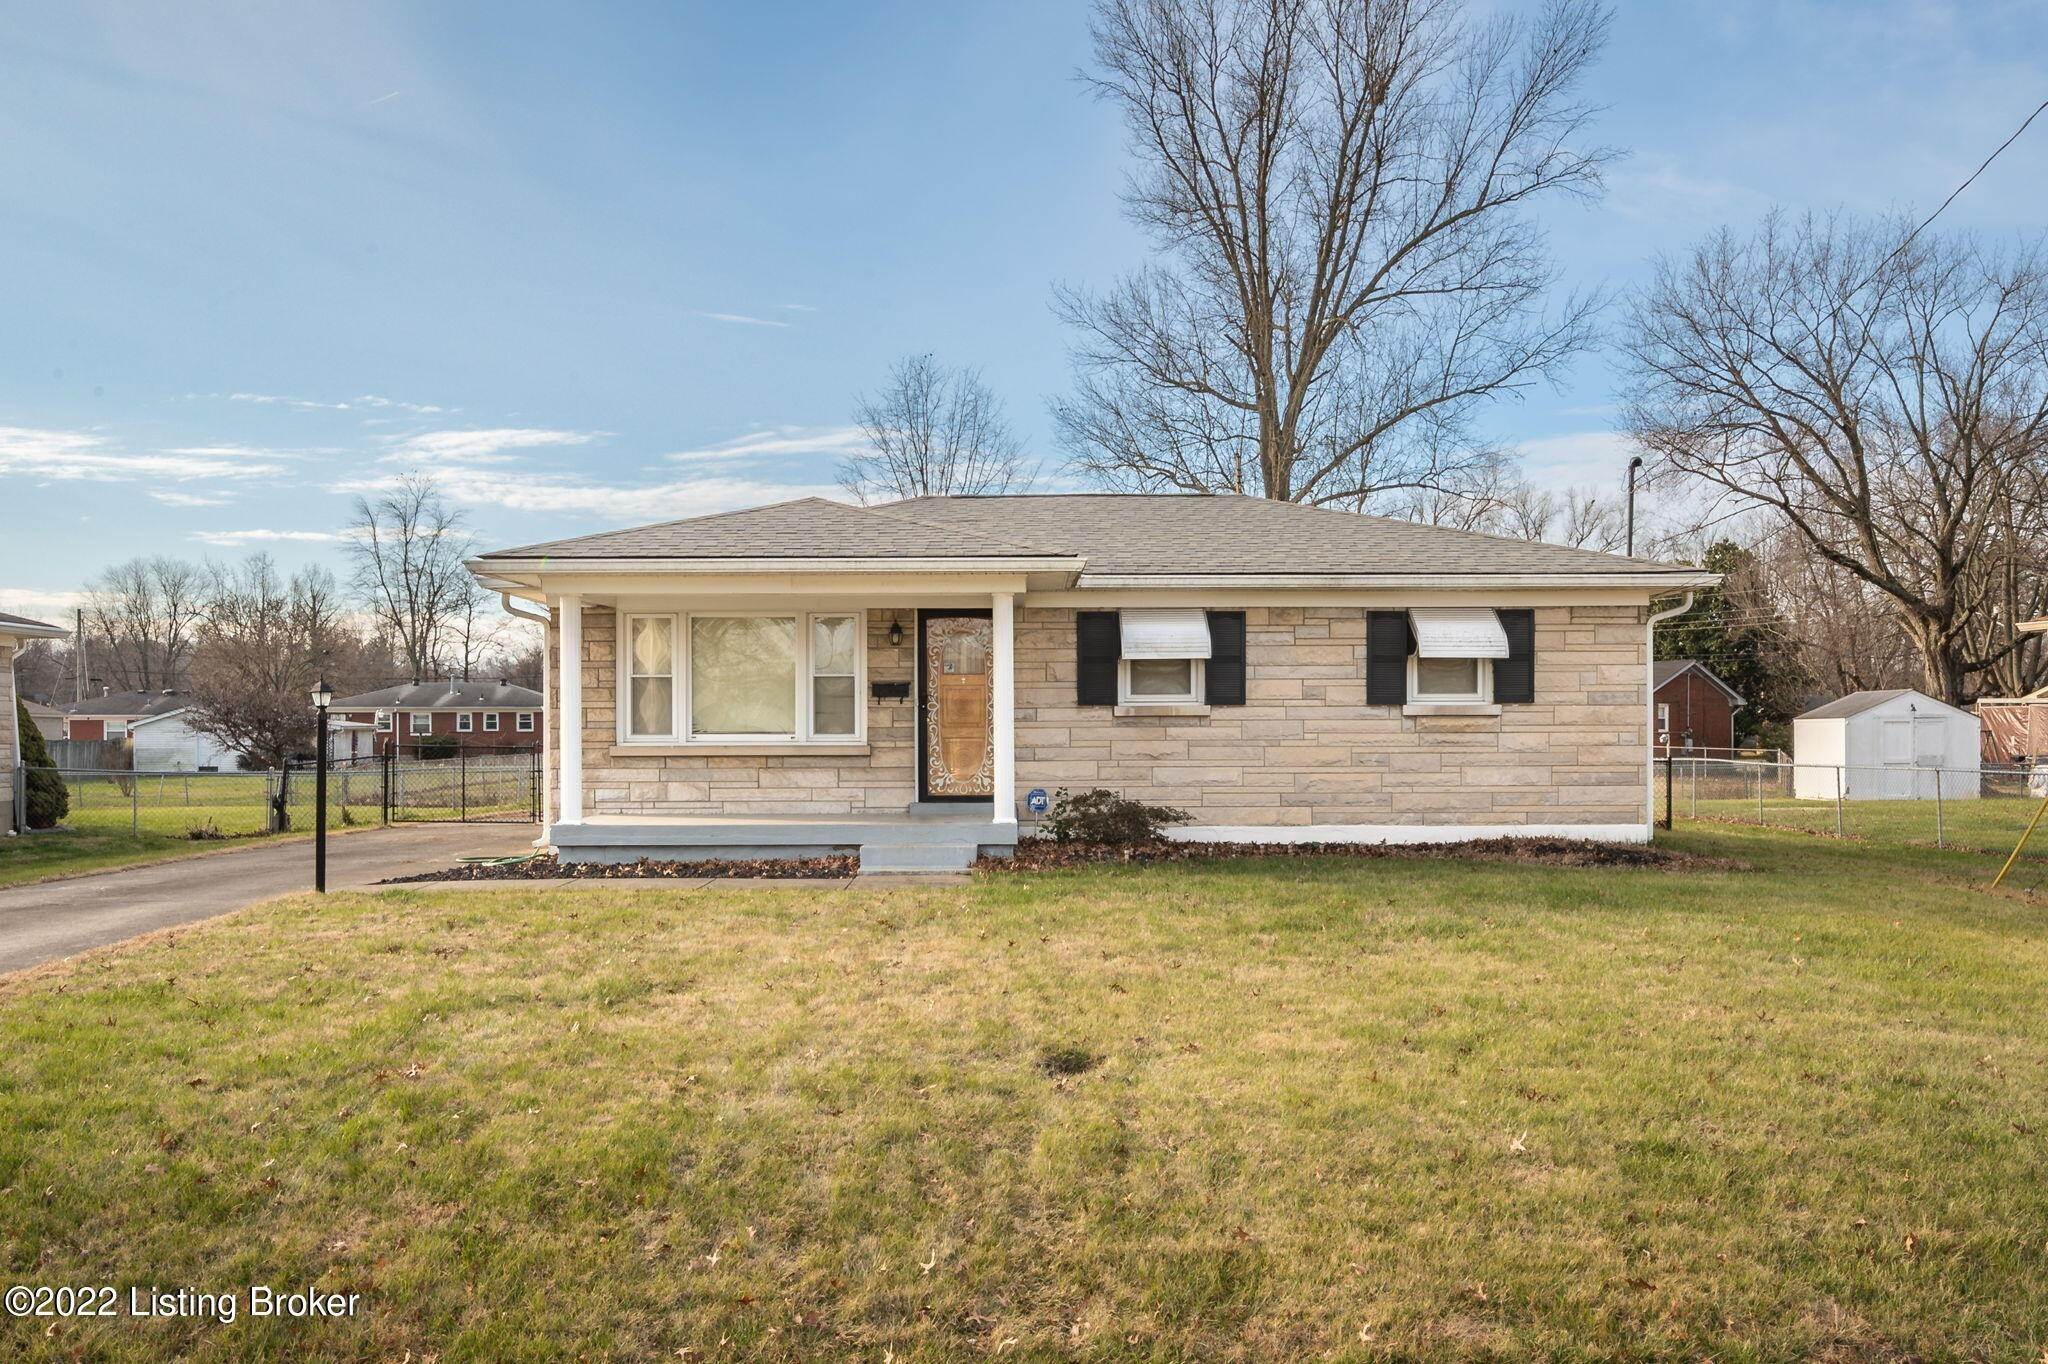 Single Family at Louisville, KY 40258